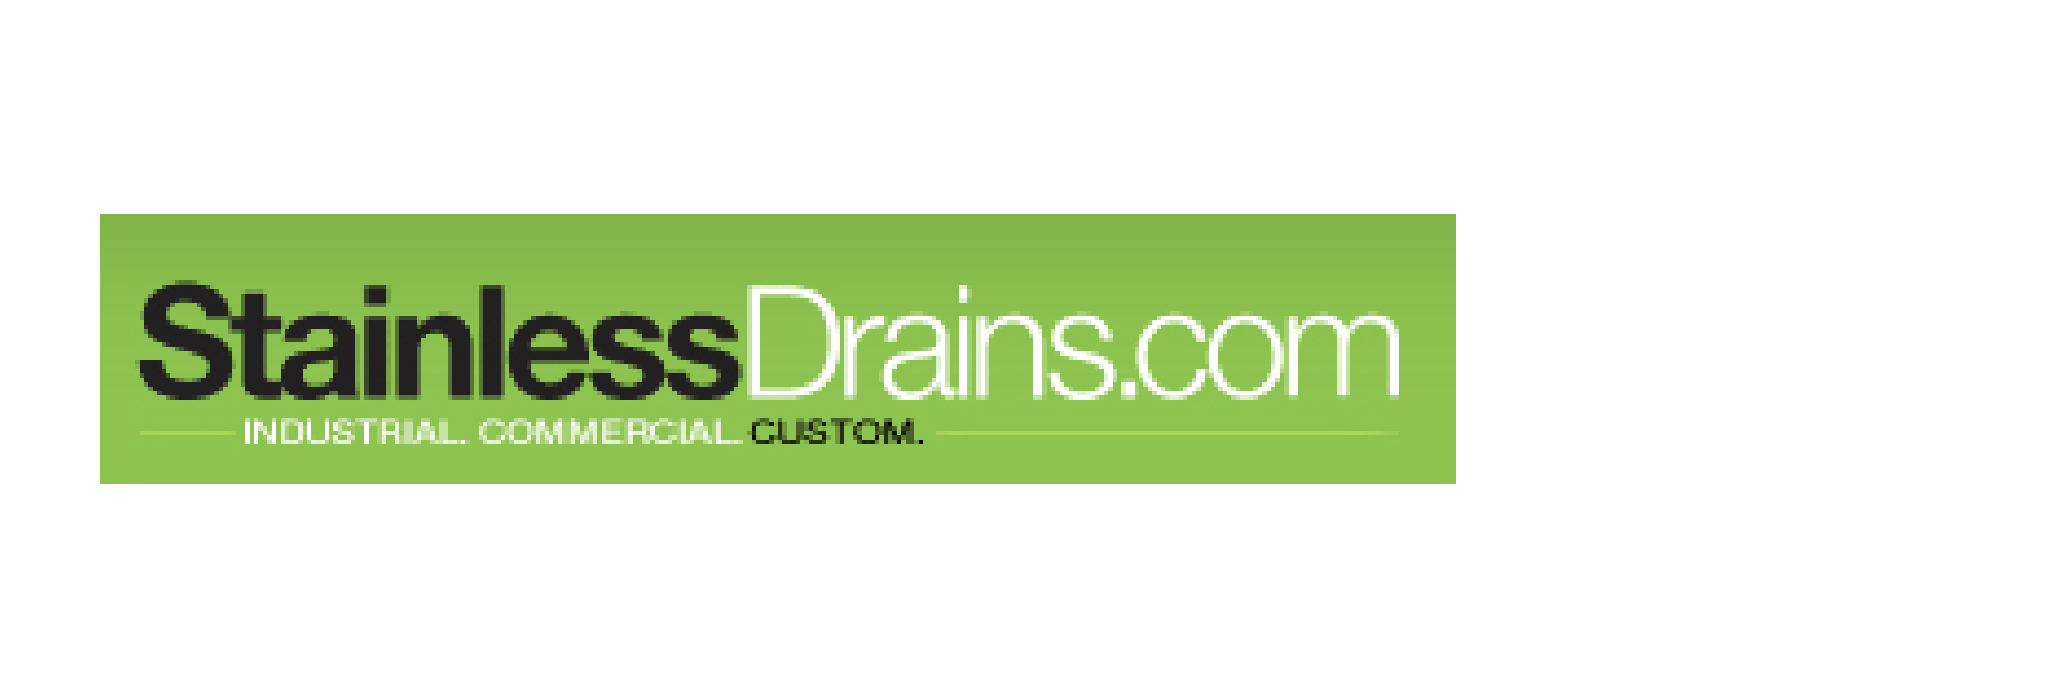 stainless drains logo